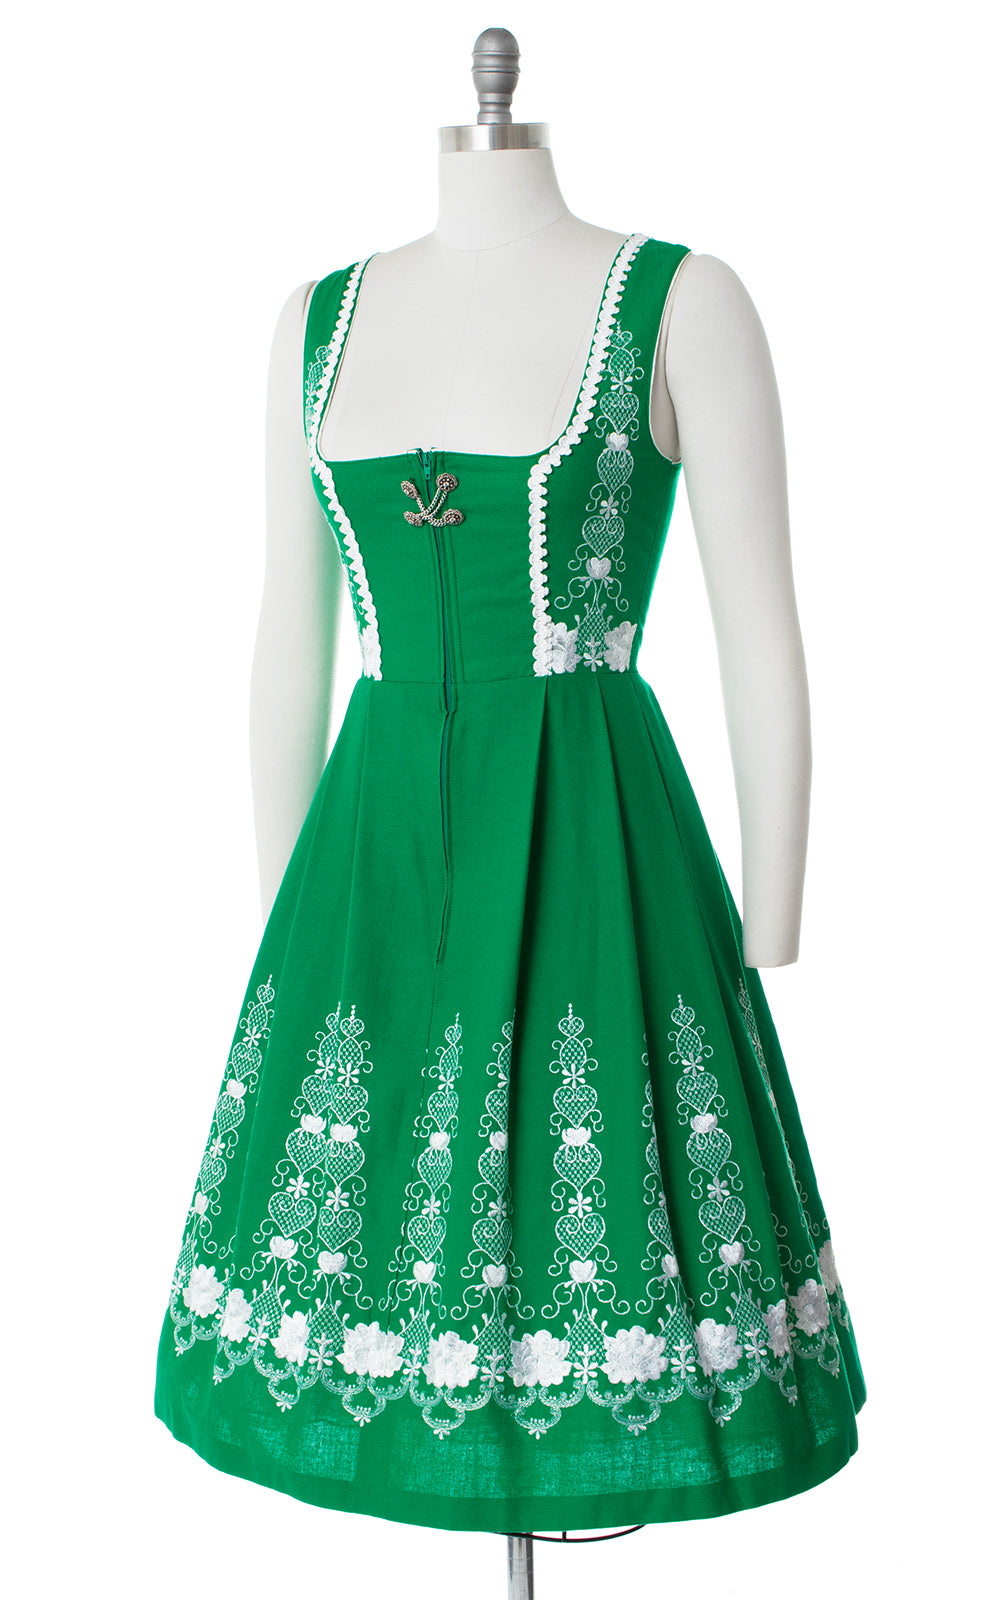 1980s Hearts & Roses Embroidered Kelly Green Dirndl